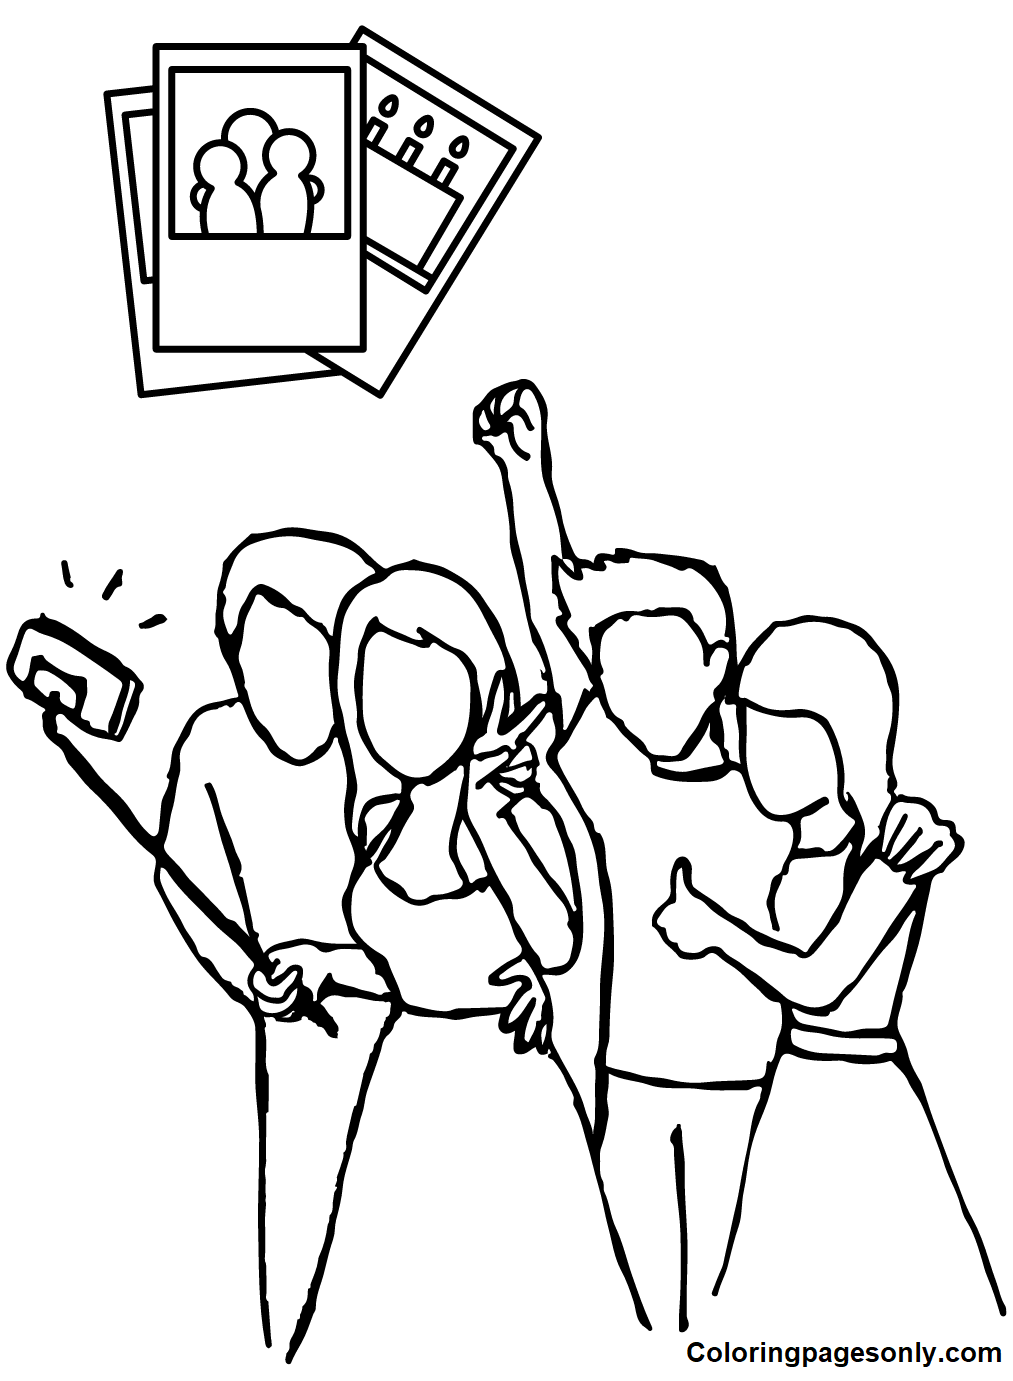 Taking Selfie with Friends Coloring Pages